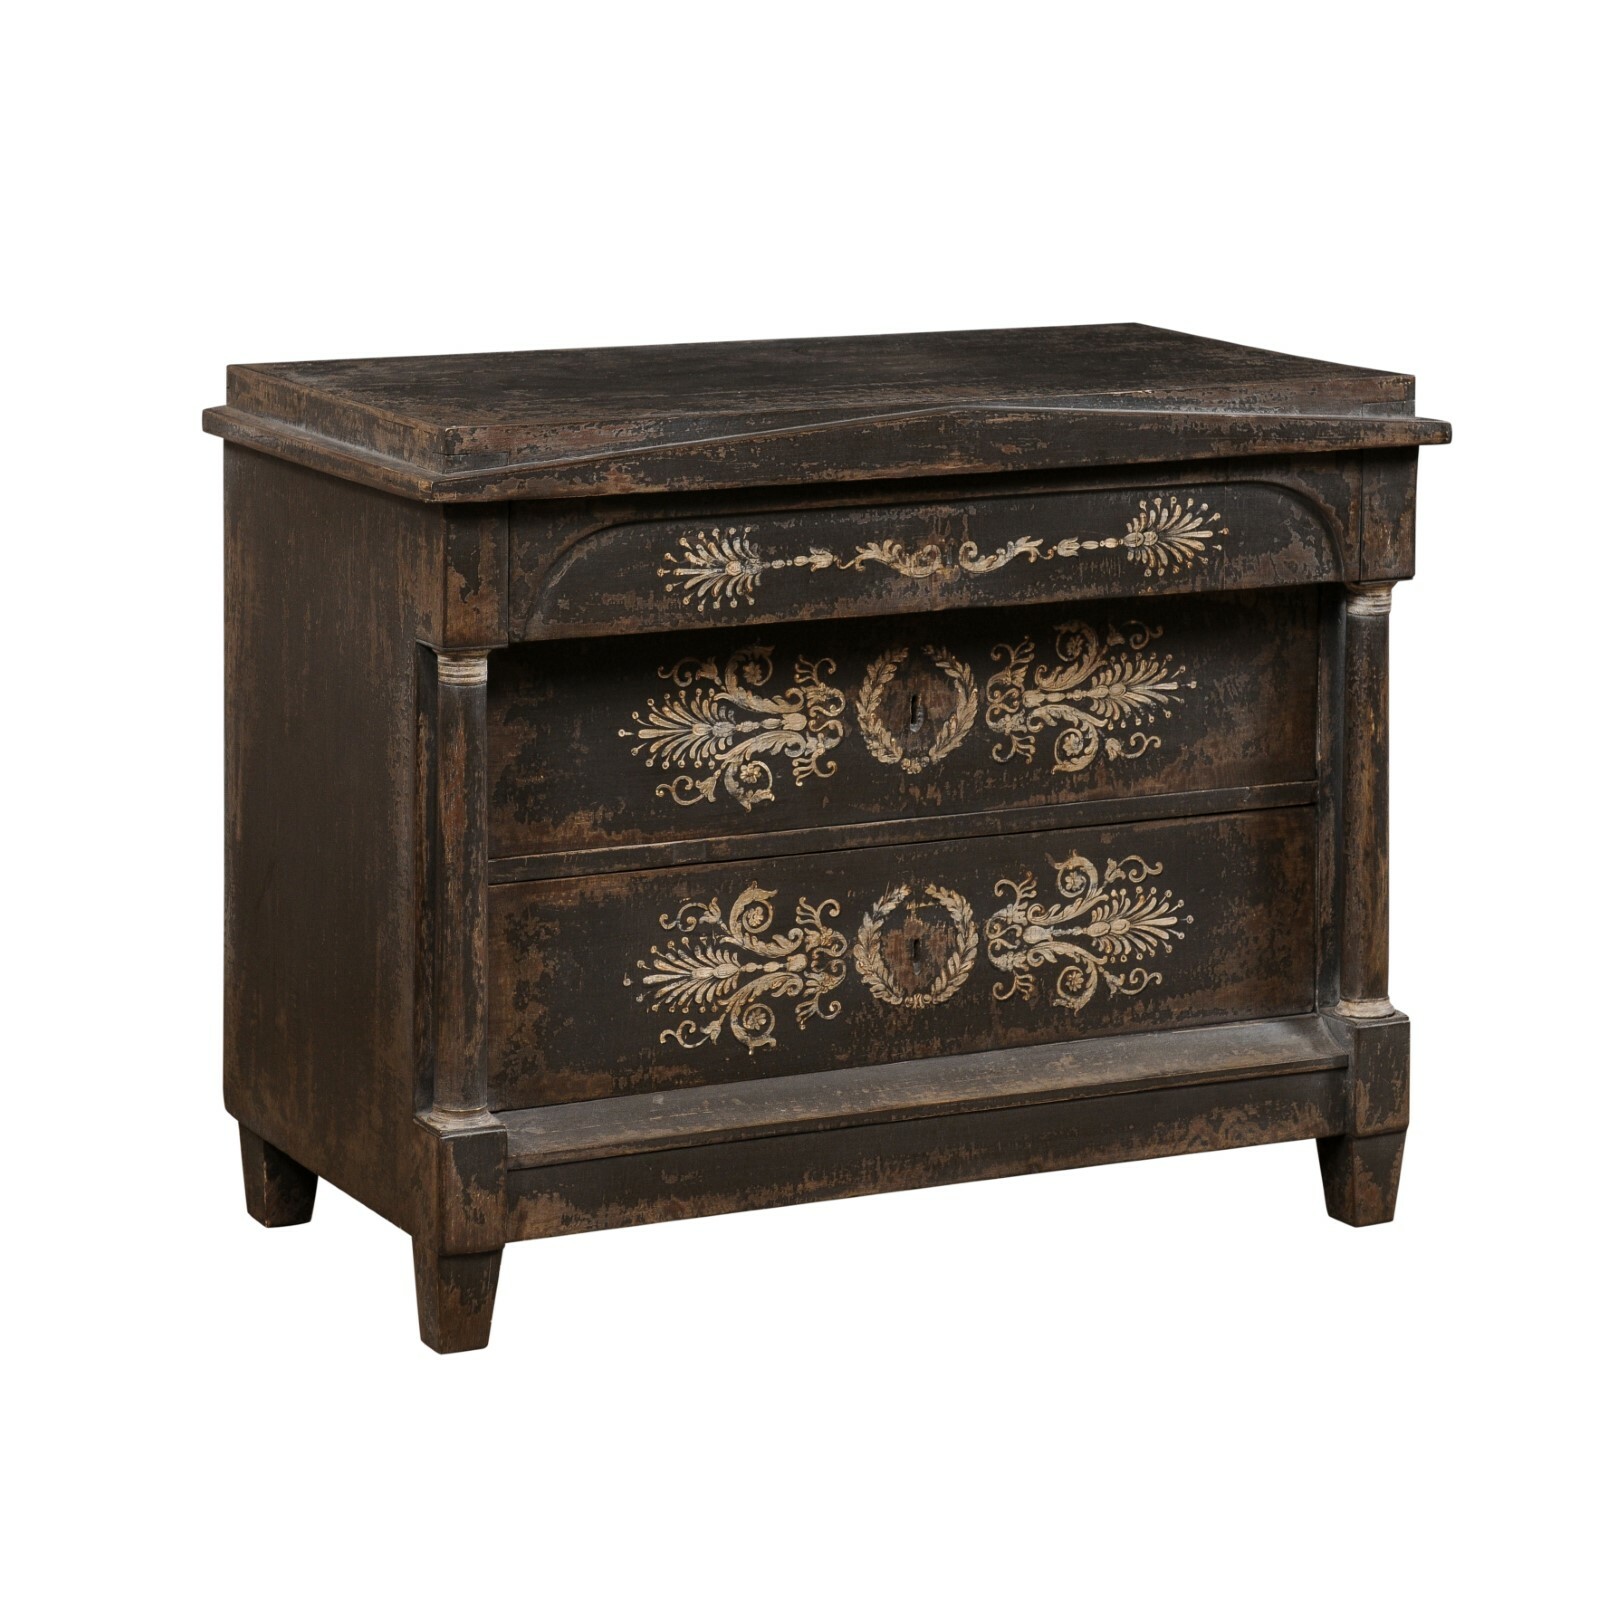 French Empire Artisan-Painted Commode